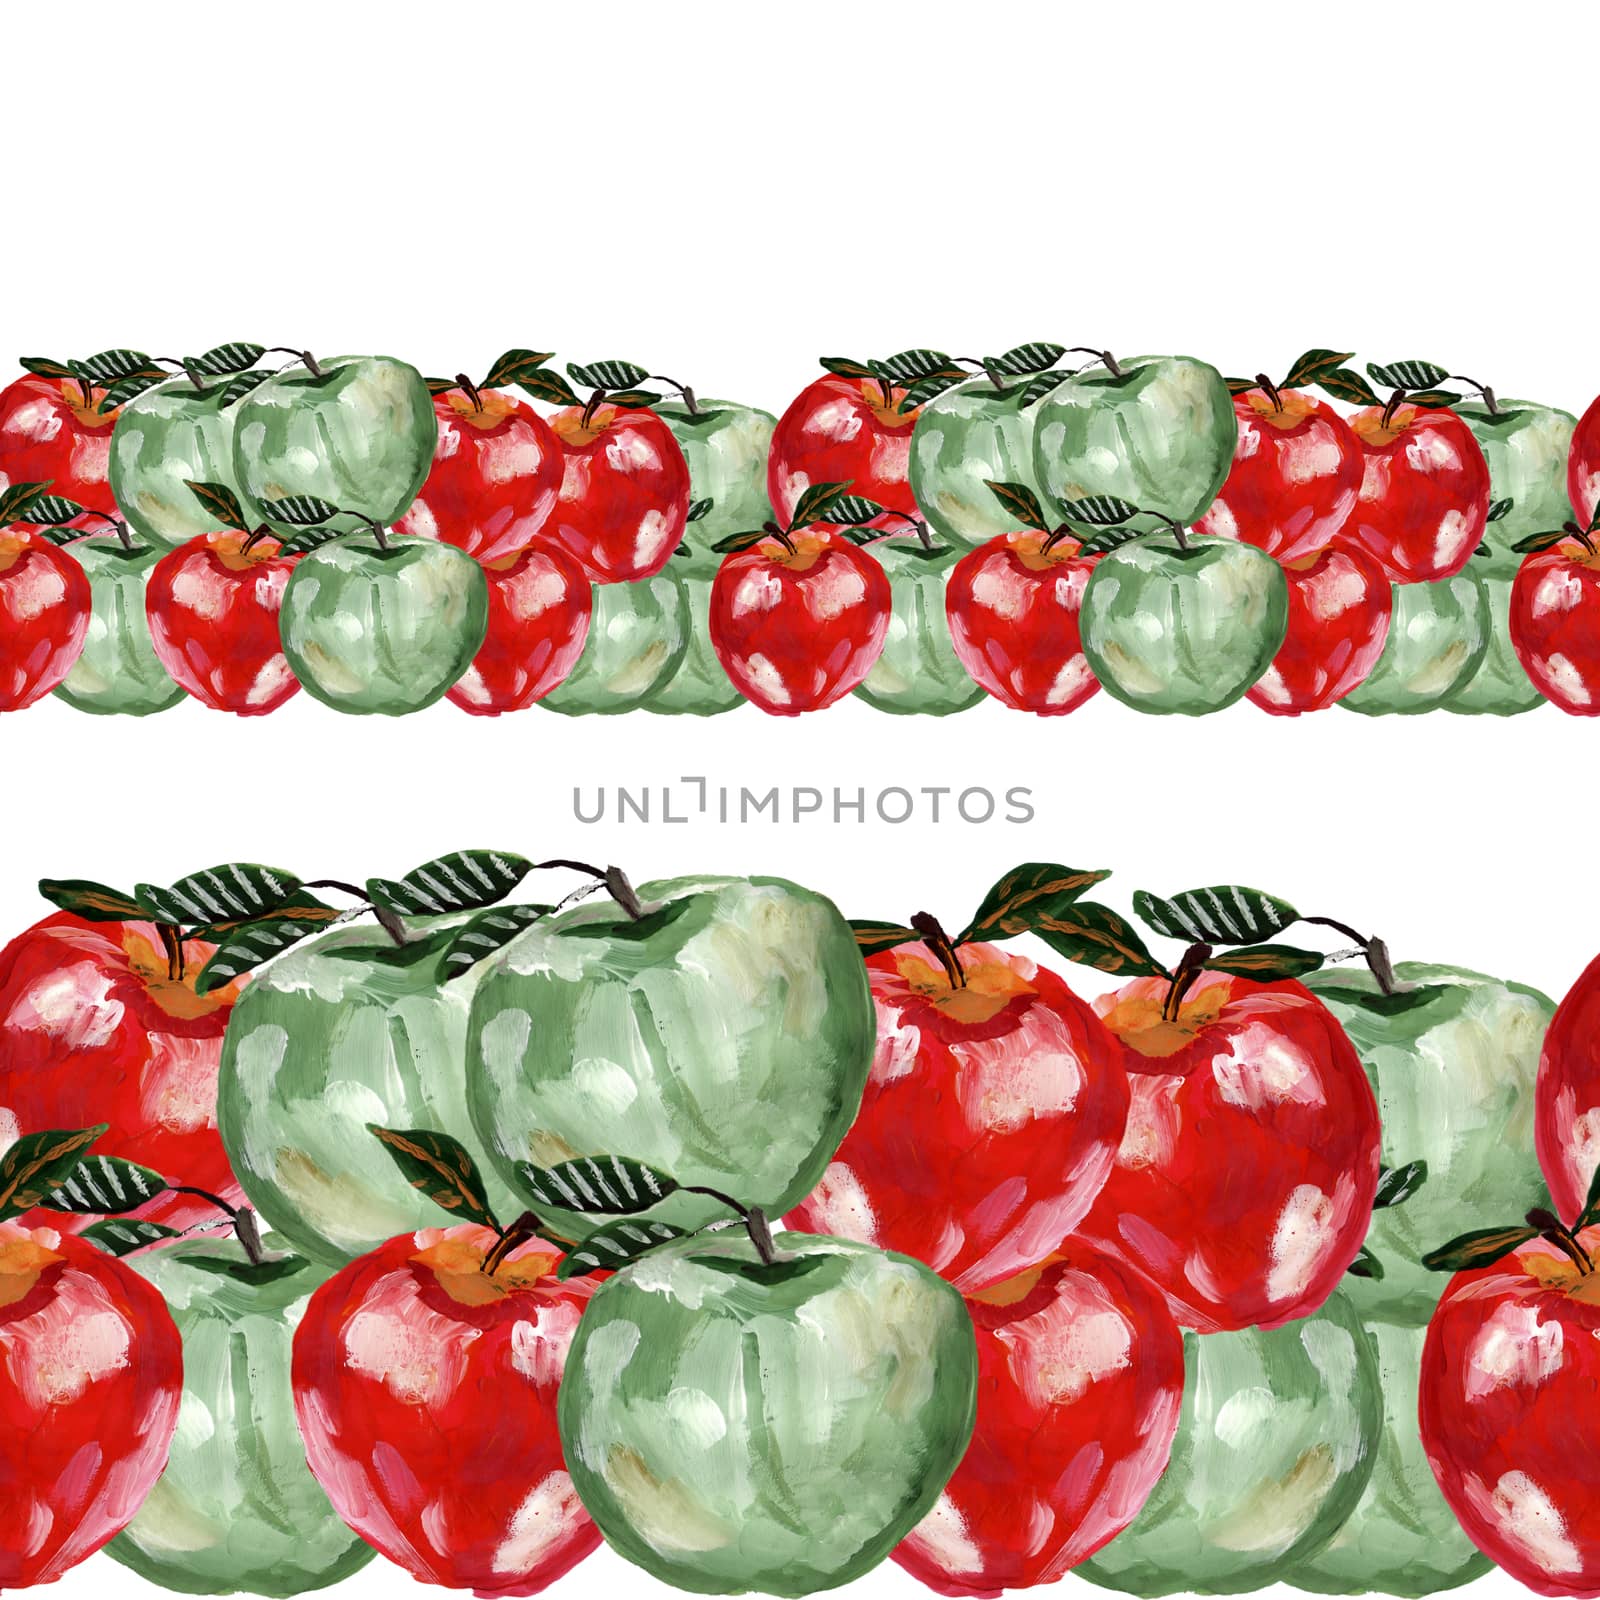 Seamless border design with hand drawn apples on white background. Repeated apple and leaves decor design, fabric, print, textile, textile, wallpaper, posters.